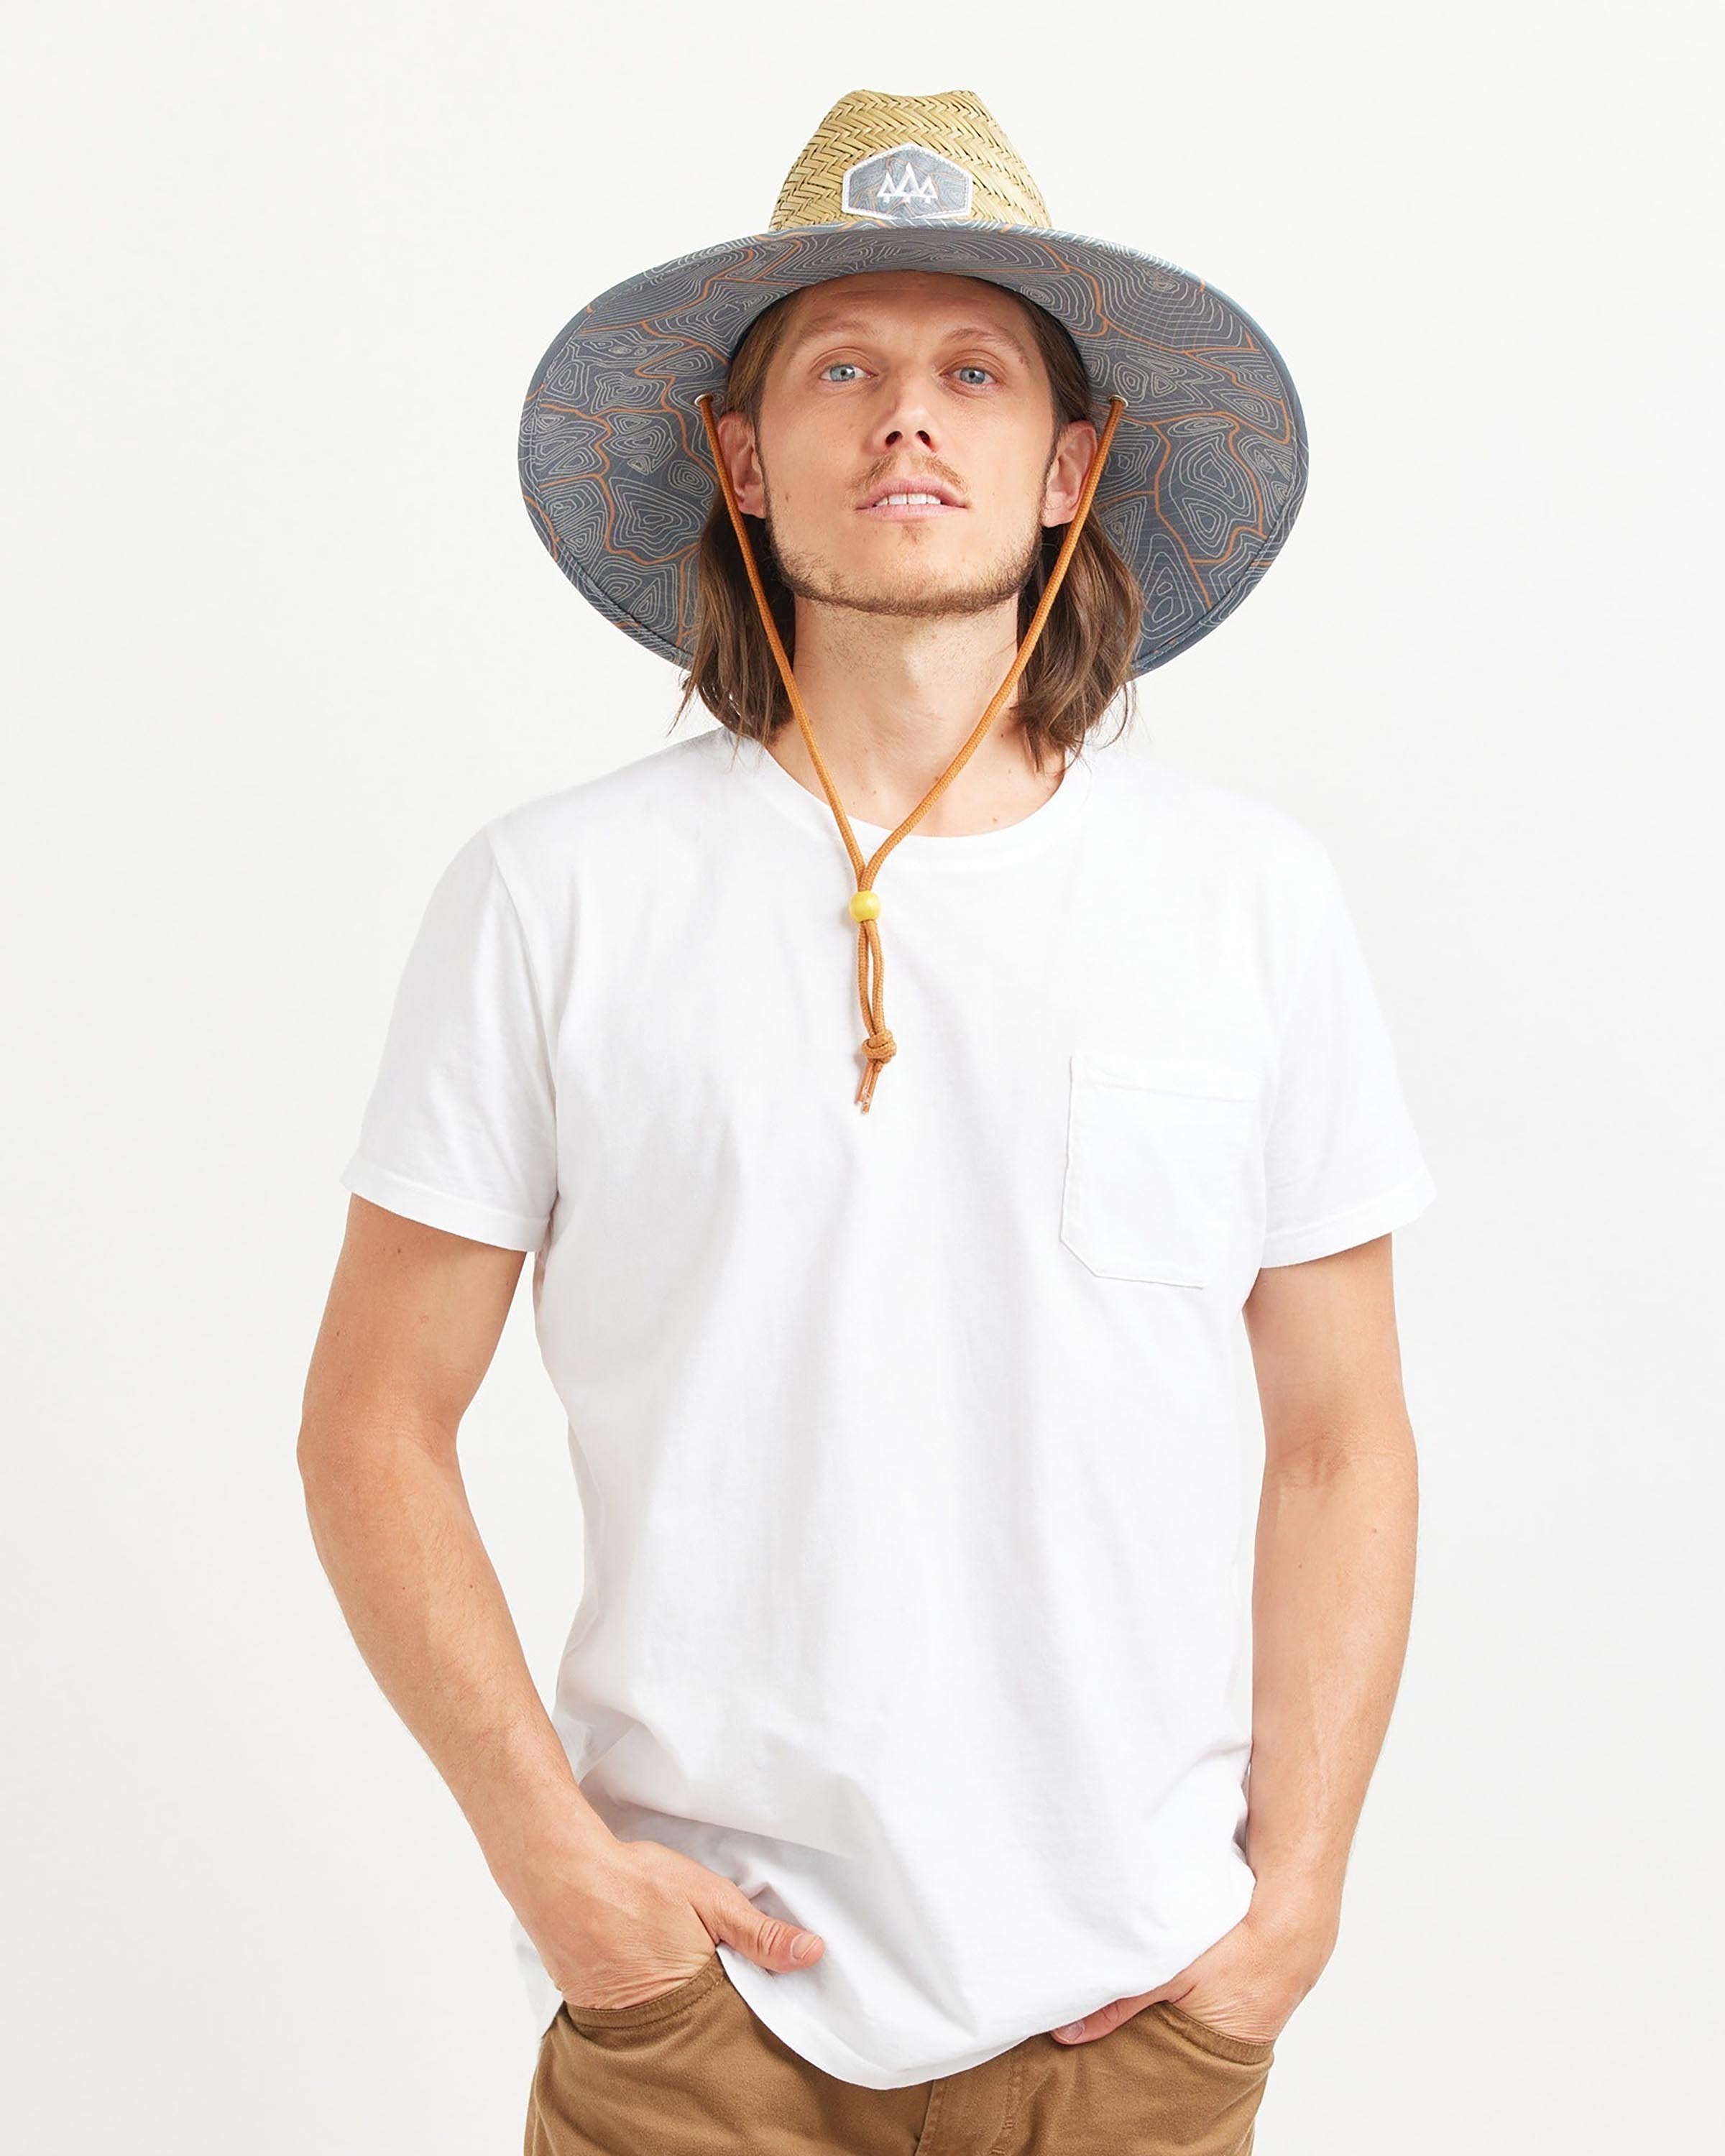 Hemlock male model looking straight wearing Nomad straw lifeguard hat with topography pattern